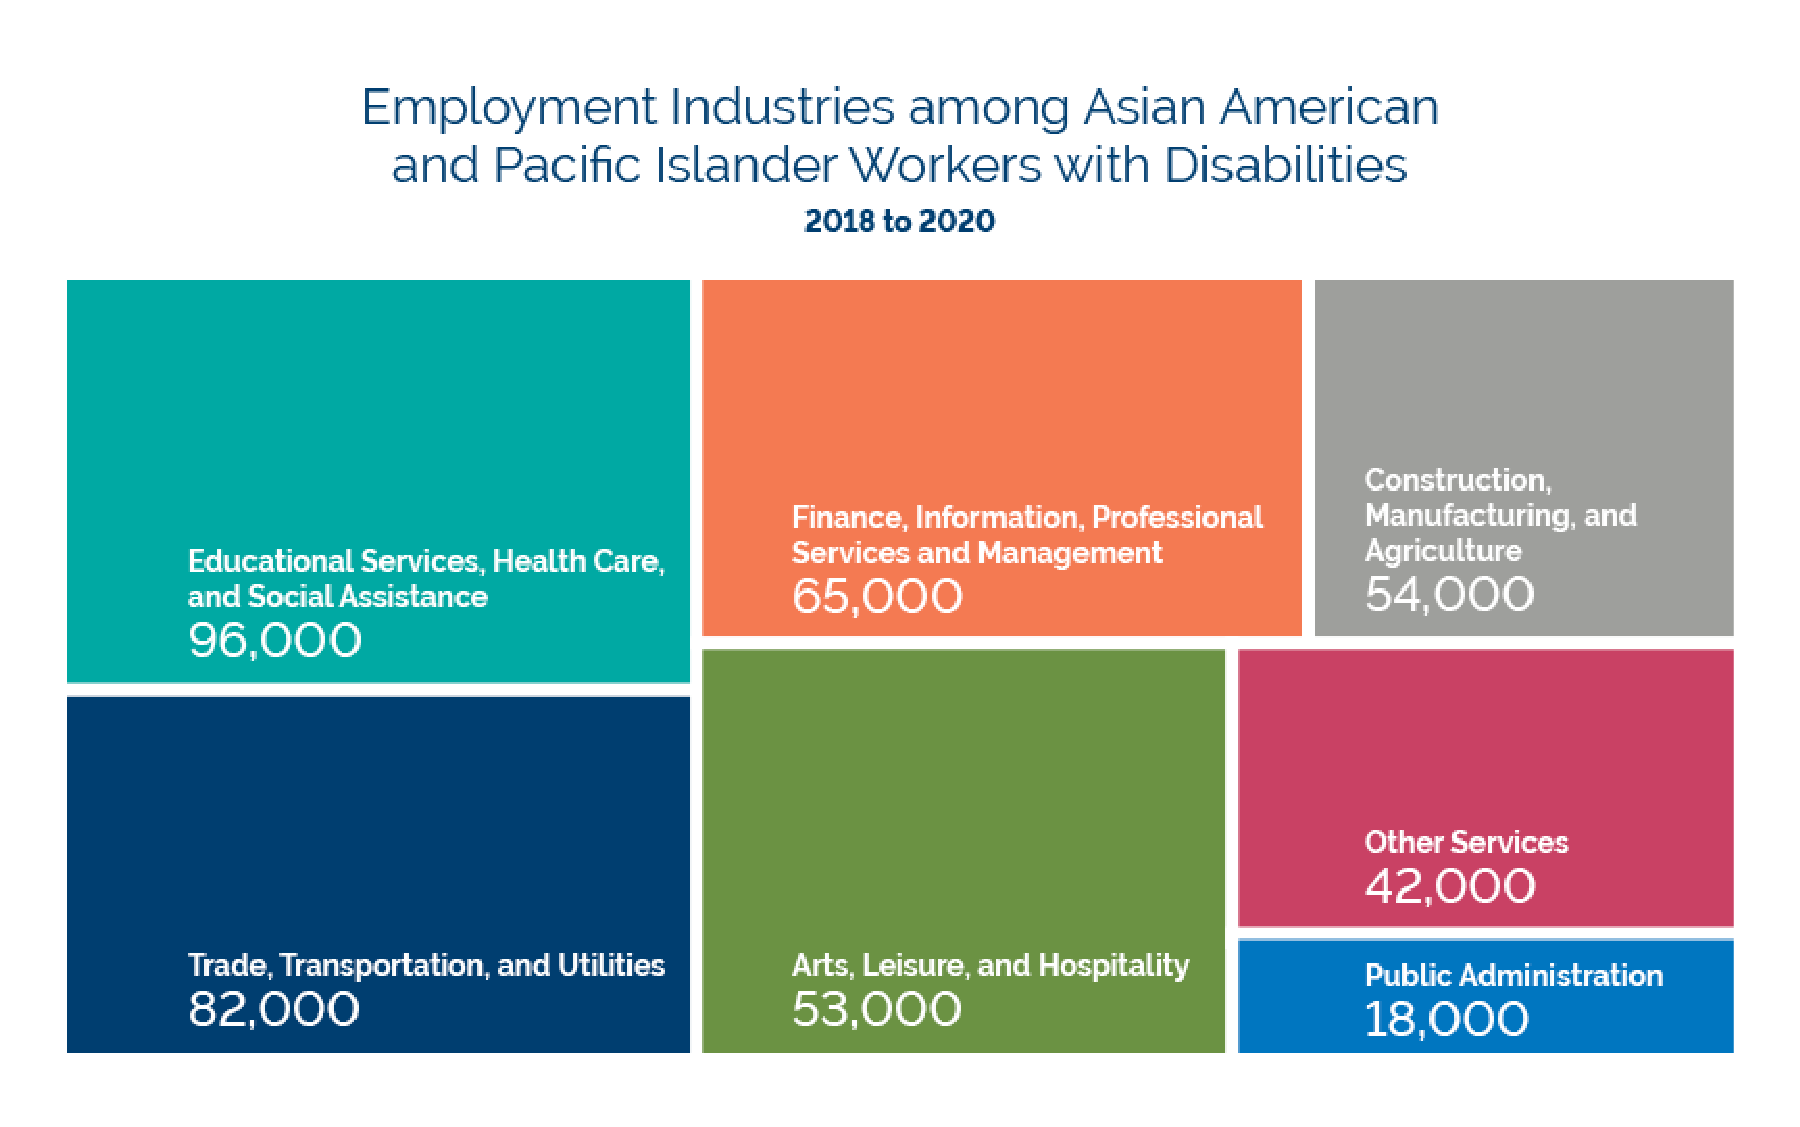 Employment Industries among Asian American and Pacific Islander Workers with Disabilities 